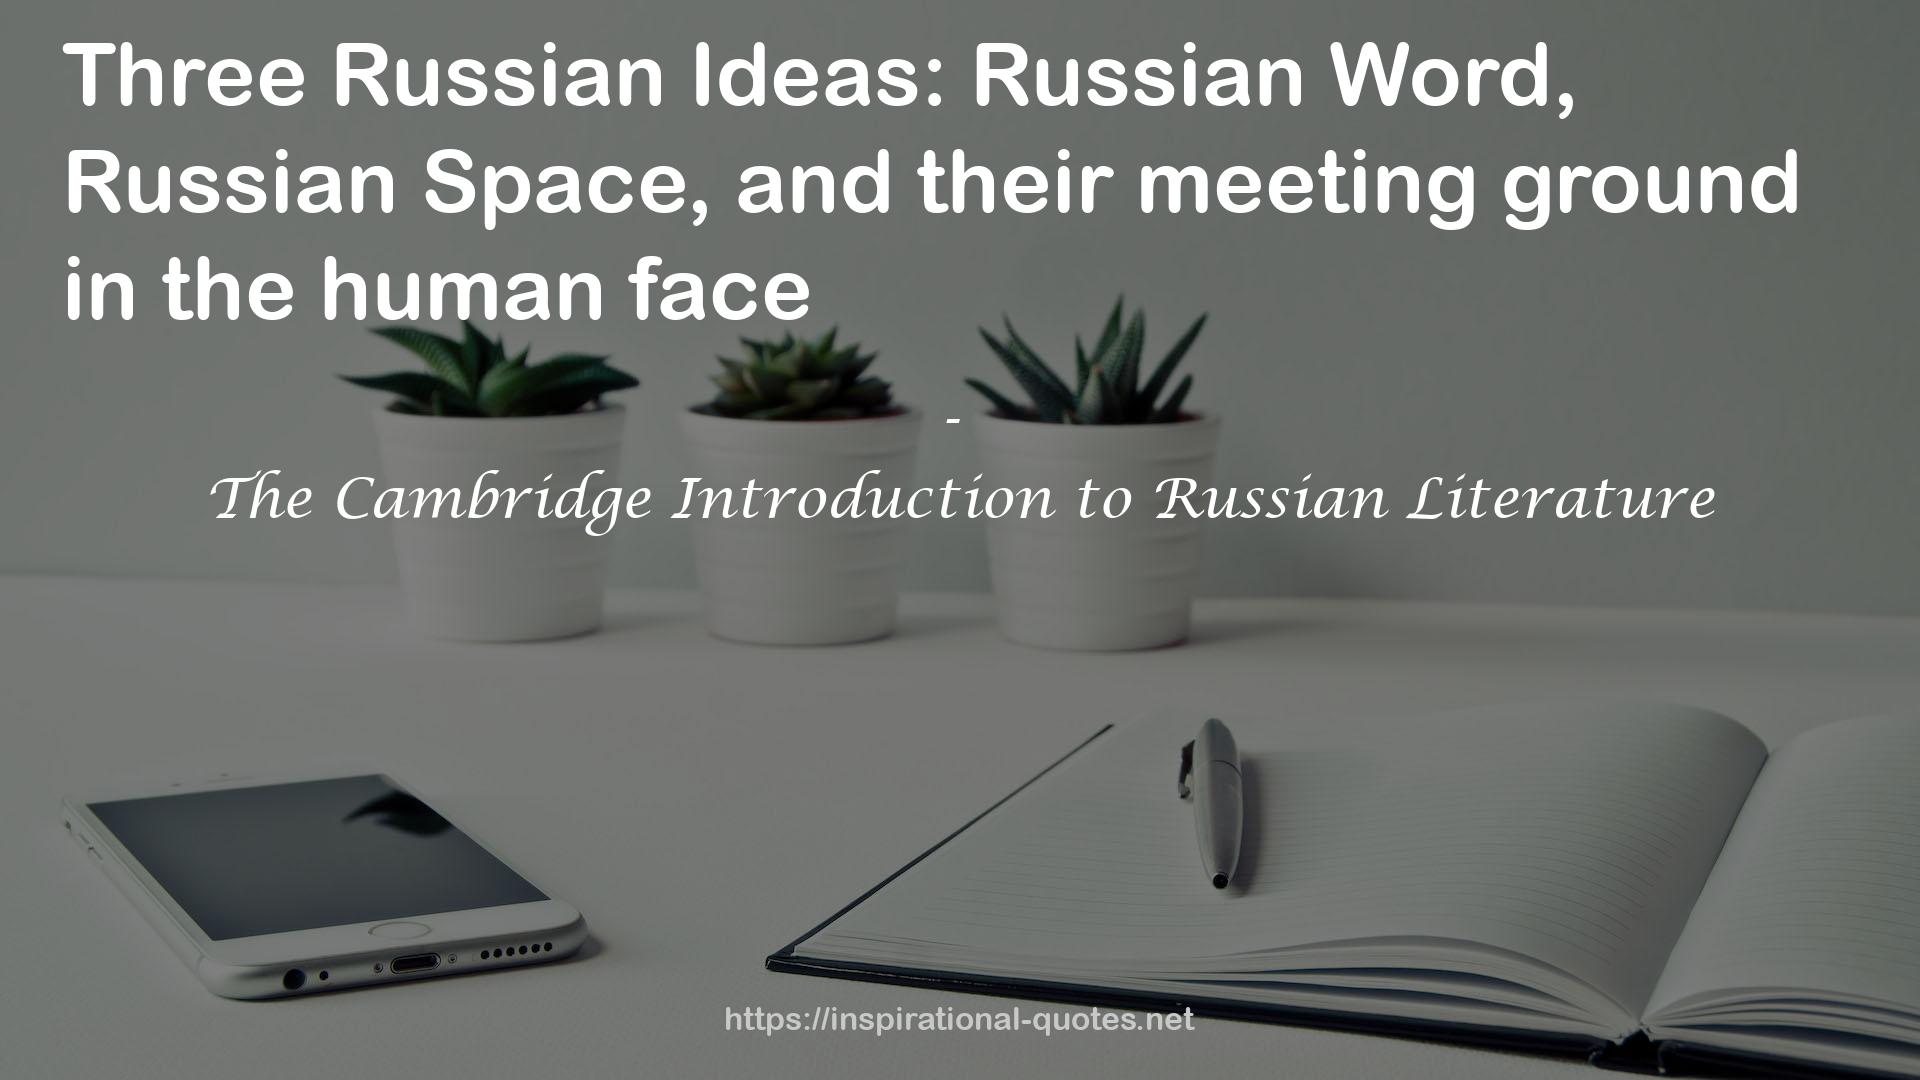 The Cambridge Introduction to Russian Literature QUOTES